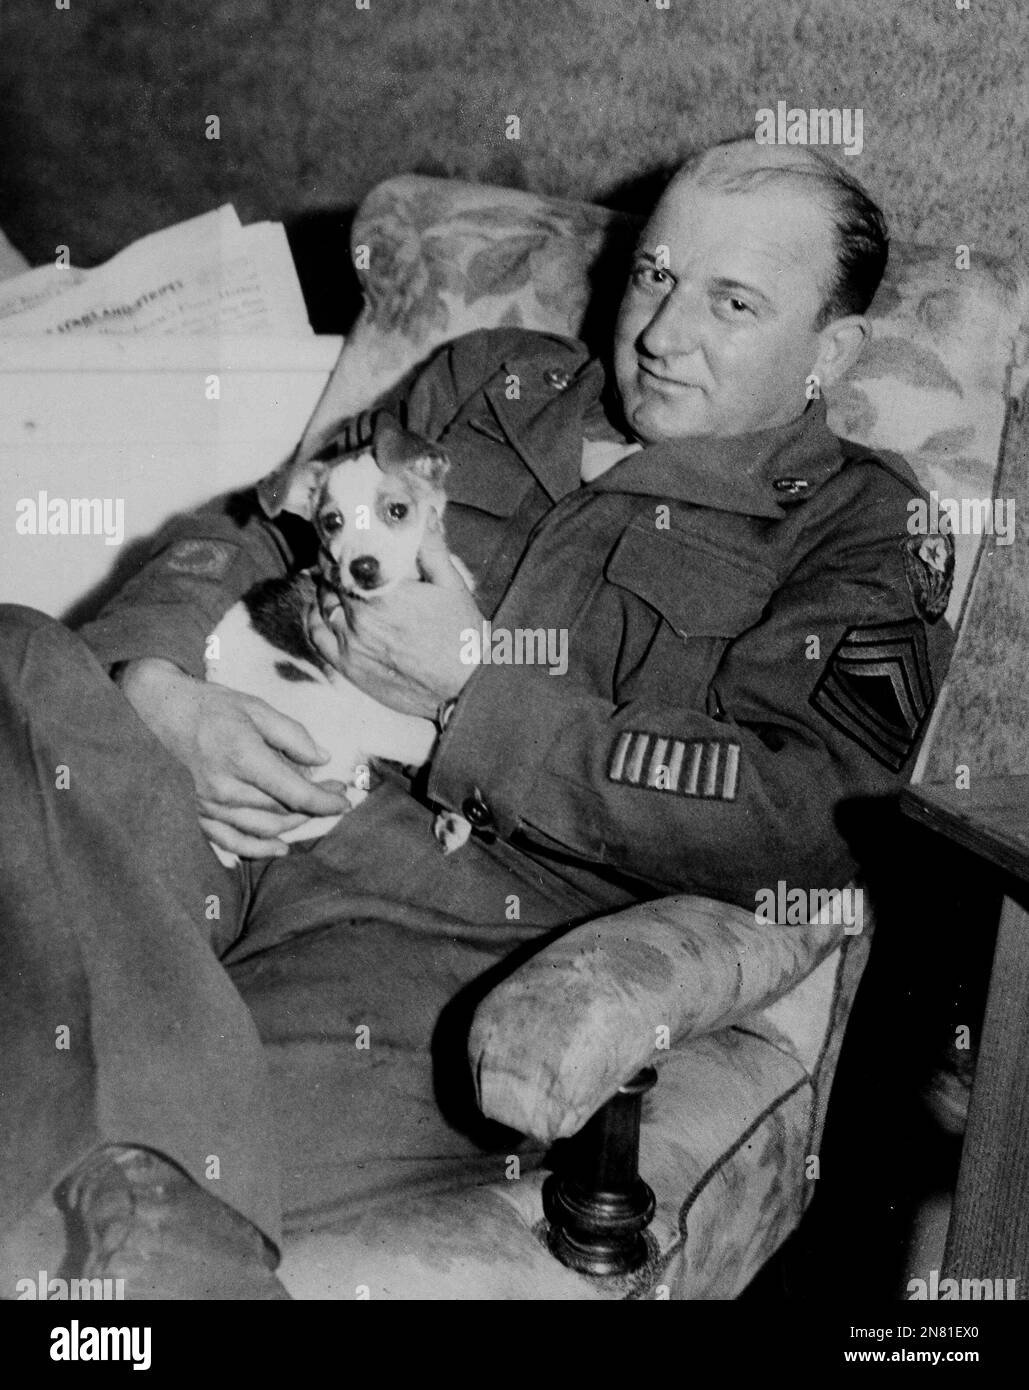 Master Sergeant James C. Woods, the soldier/hangman who executed the ten Nazis at Nuremberg, with his dog at Heidelberg, Germany, Oct. 18, 1946. (AP Photo) Stock Photo